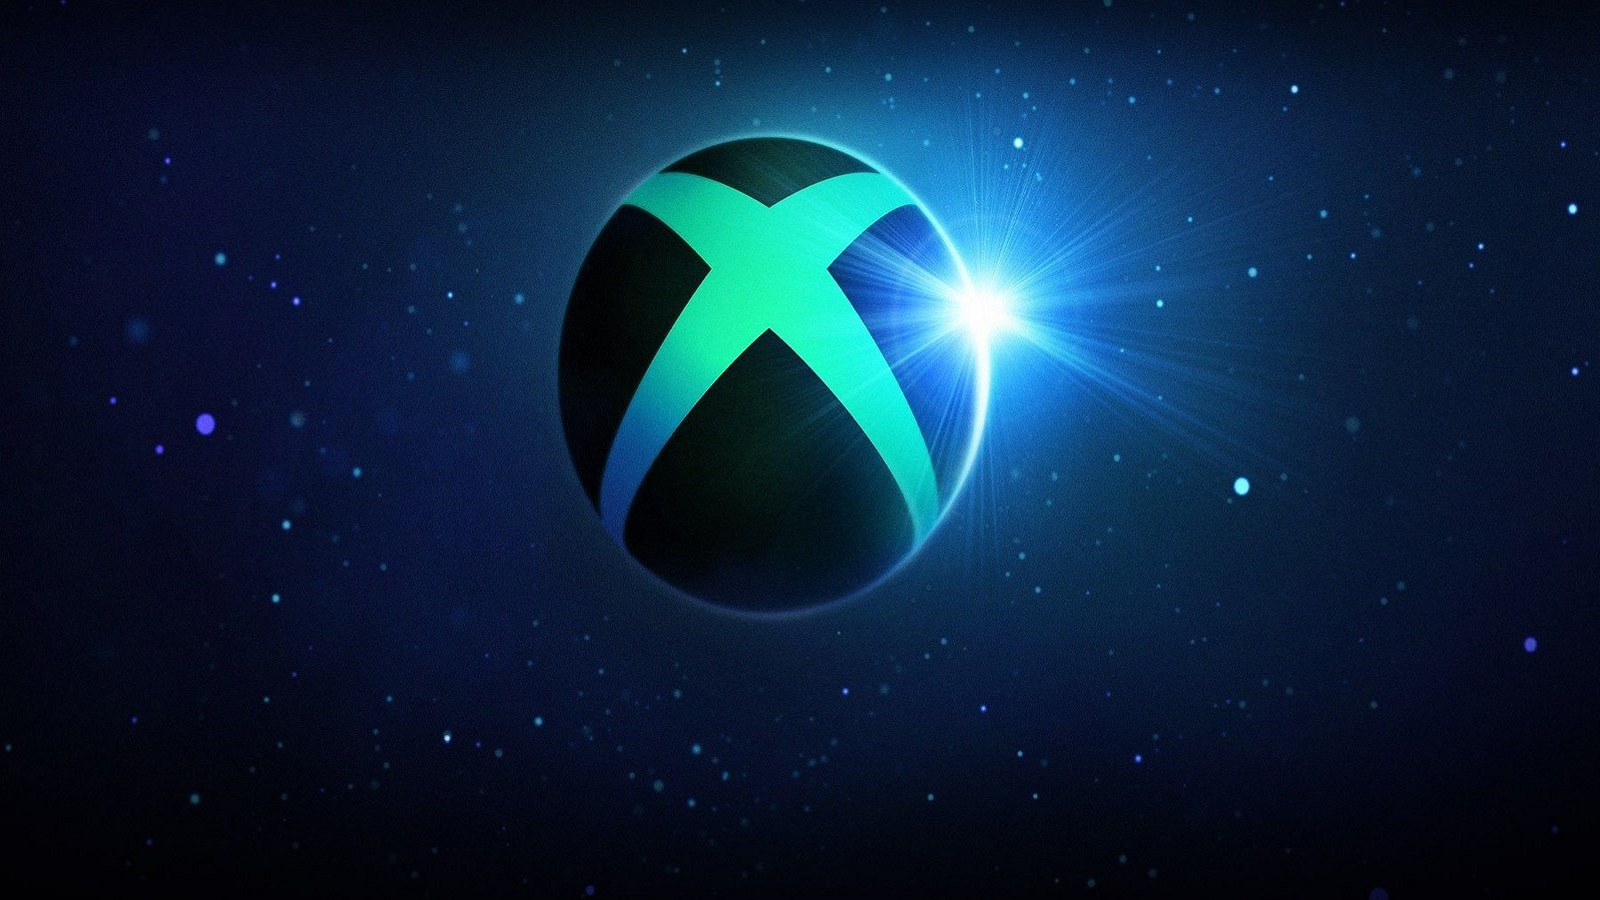 Xbox Quietly Forgets About Redfall At Big 2023 Showcase